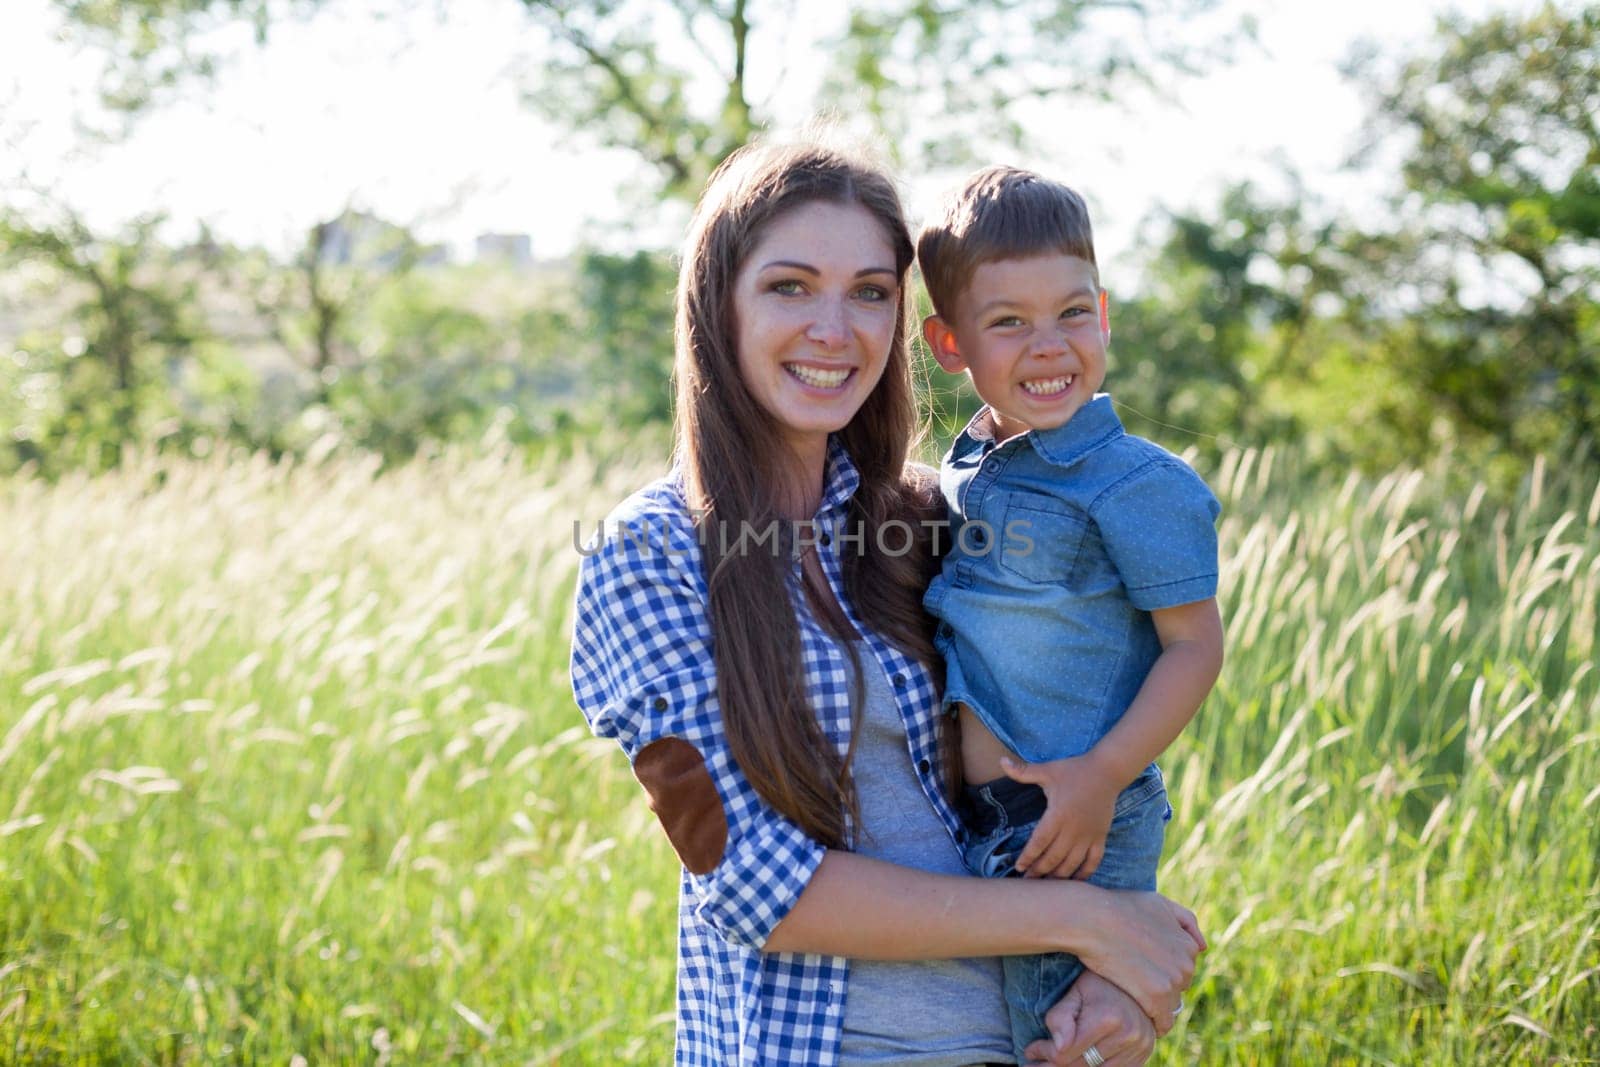 Portrait of a woman with her son on a walk in nature